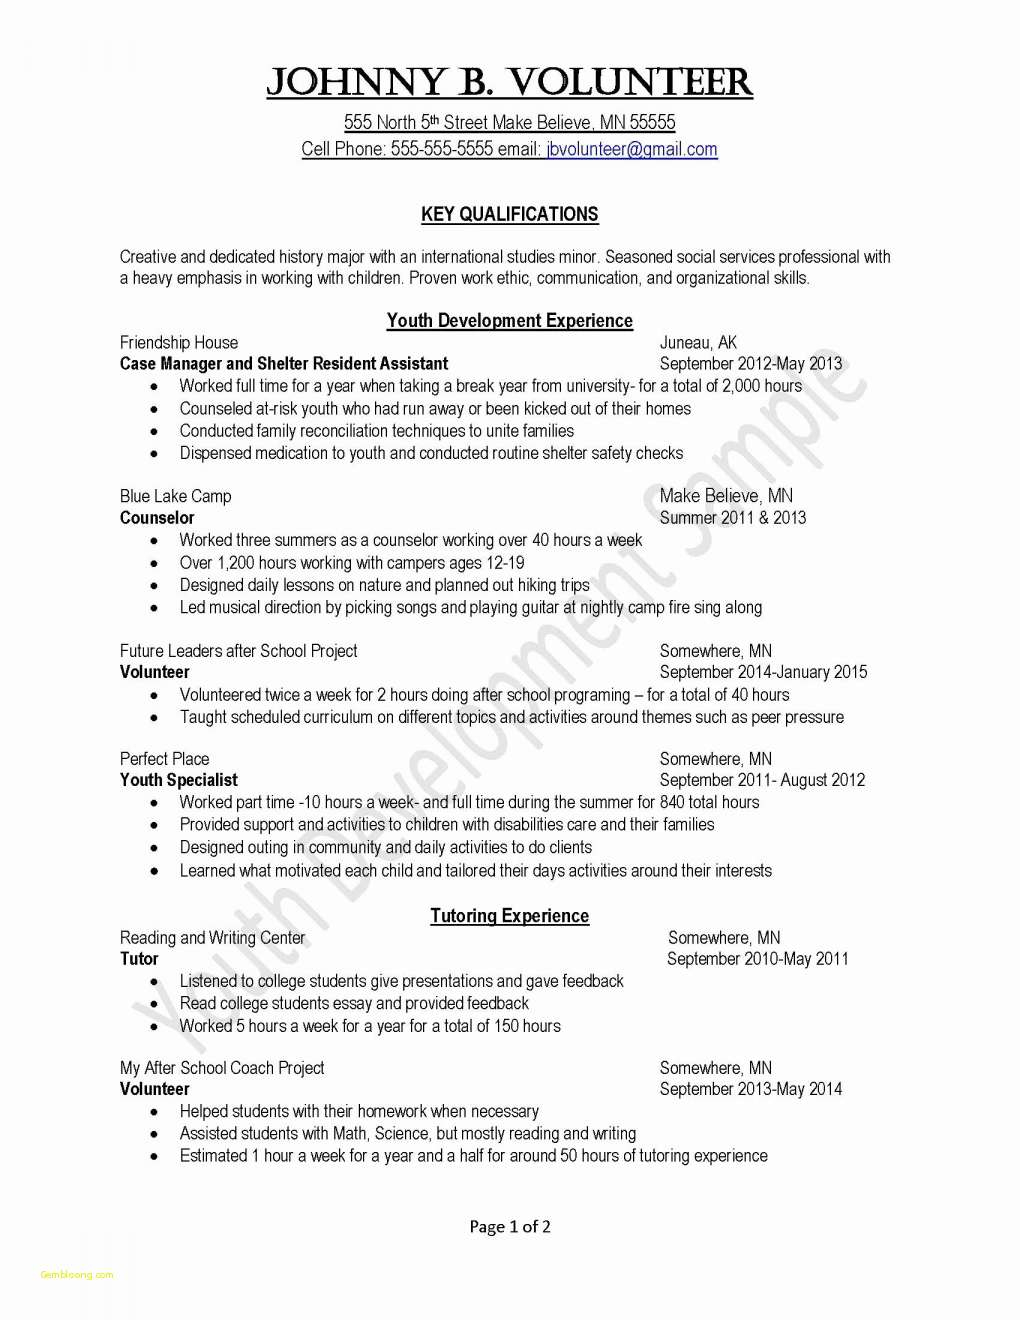 Help Desk Cover Letter Template - Free Resume Templates for Students Takenosumi